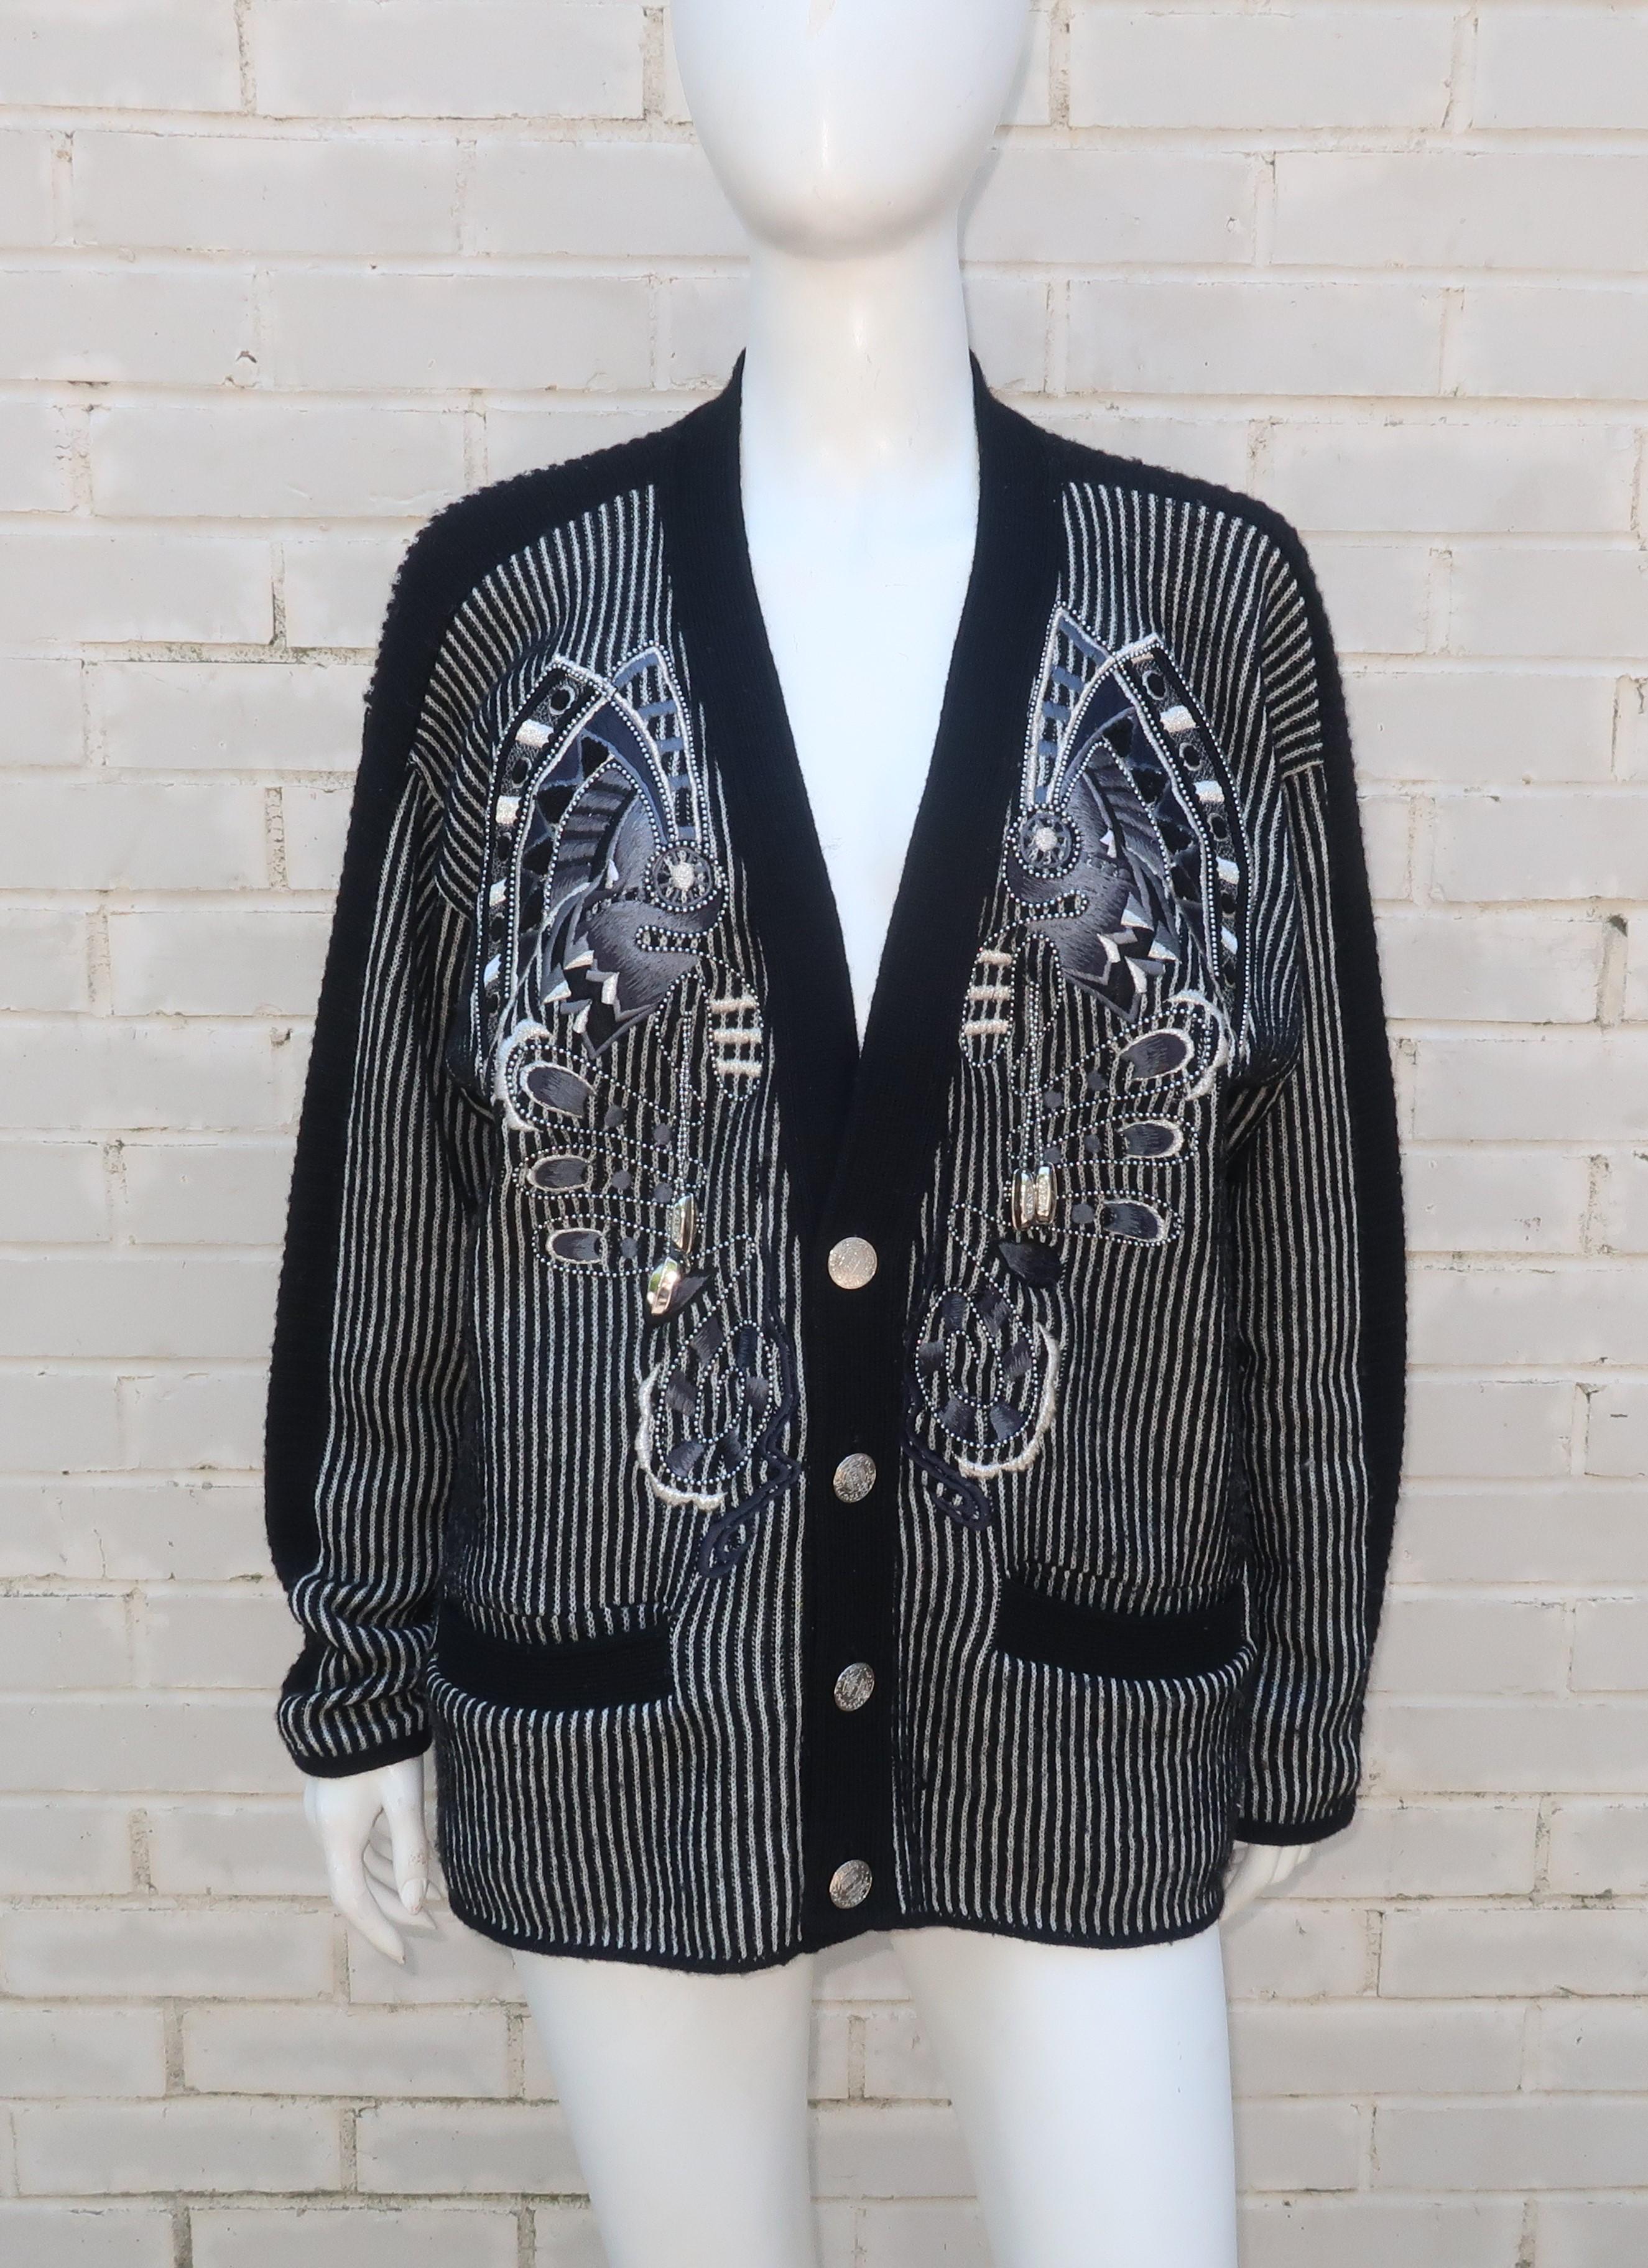 Black and white striped wool cardigan sweater with abstract embroidered decoration, silver metallic threading, dangling 'Kansai' silver charms, ball bearing style beading and logo embossed buttons by Japanese designer, Kansai Yamamoto.  Yamamoto was